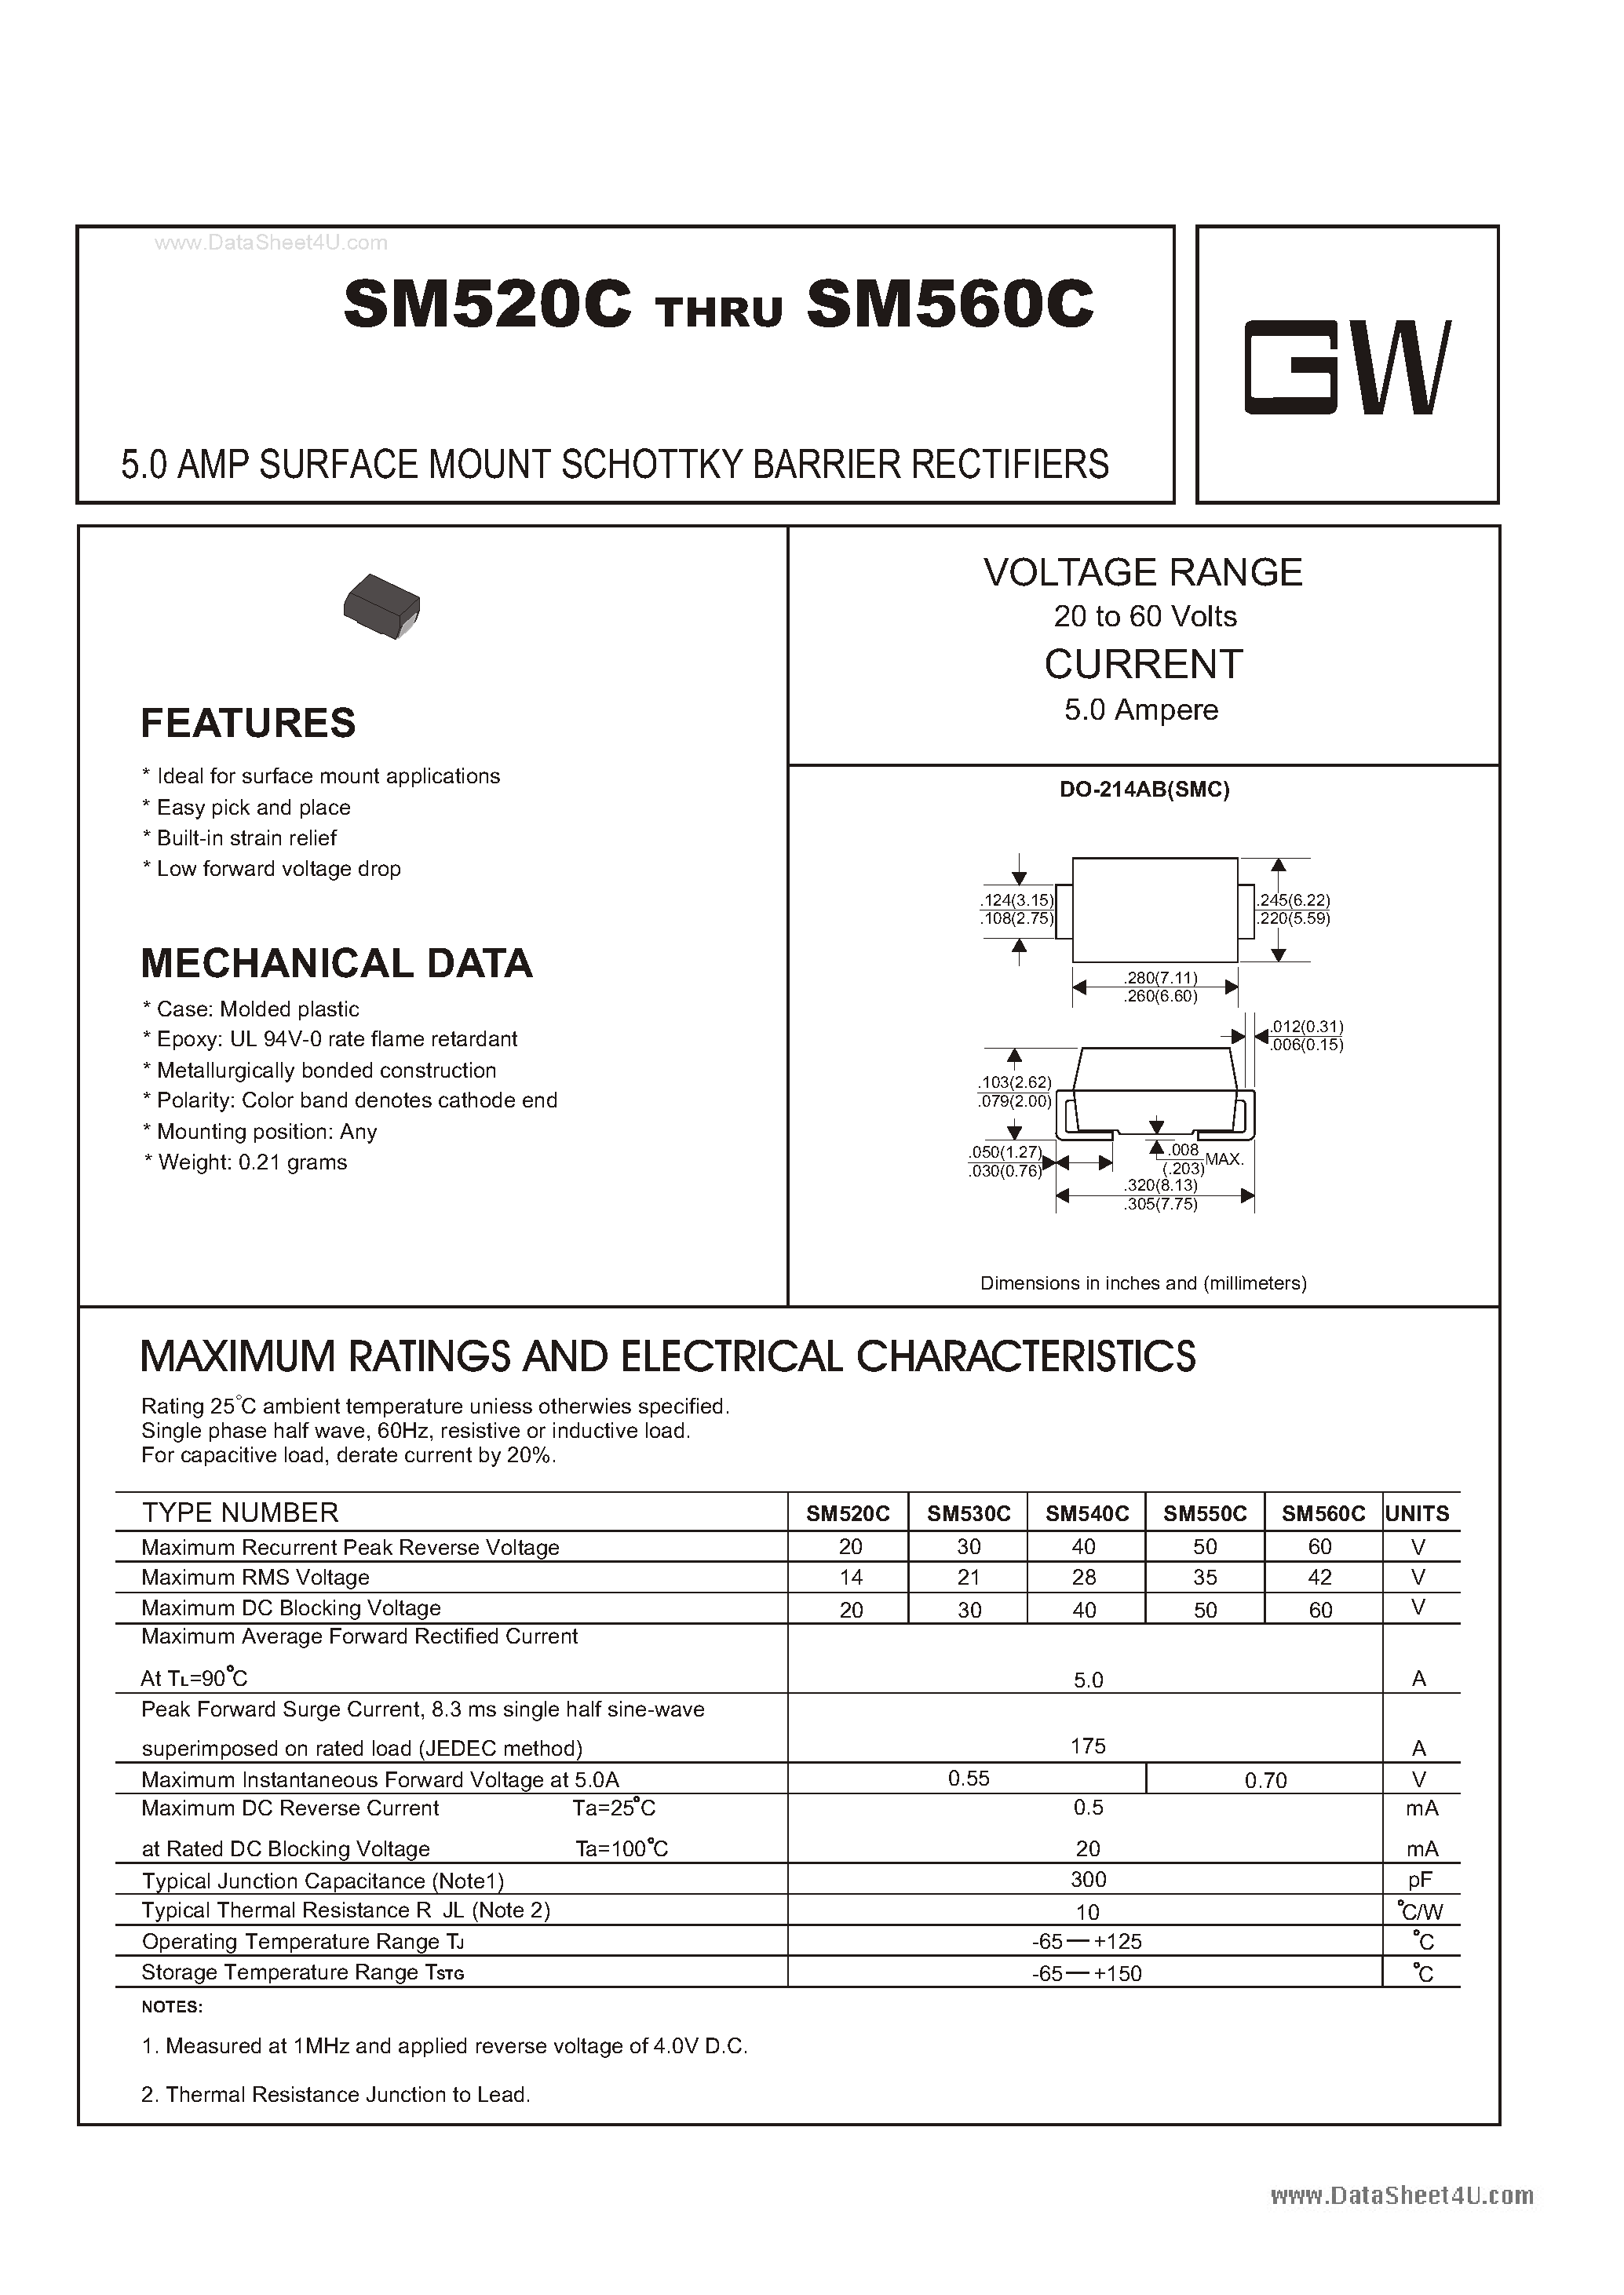 Datasheet SM520C - (SM520C - SM560C) 5.0 AMP SURFACE MOUNT SCHOTTKY BARRIER RECTIFIERS page 1